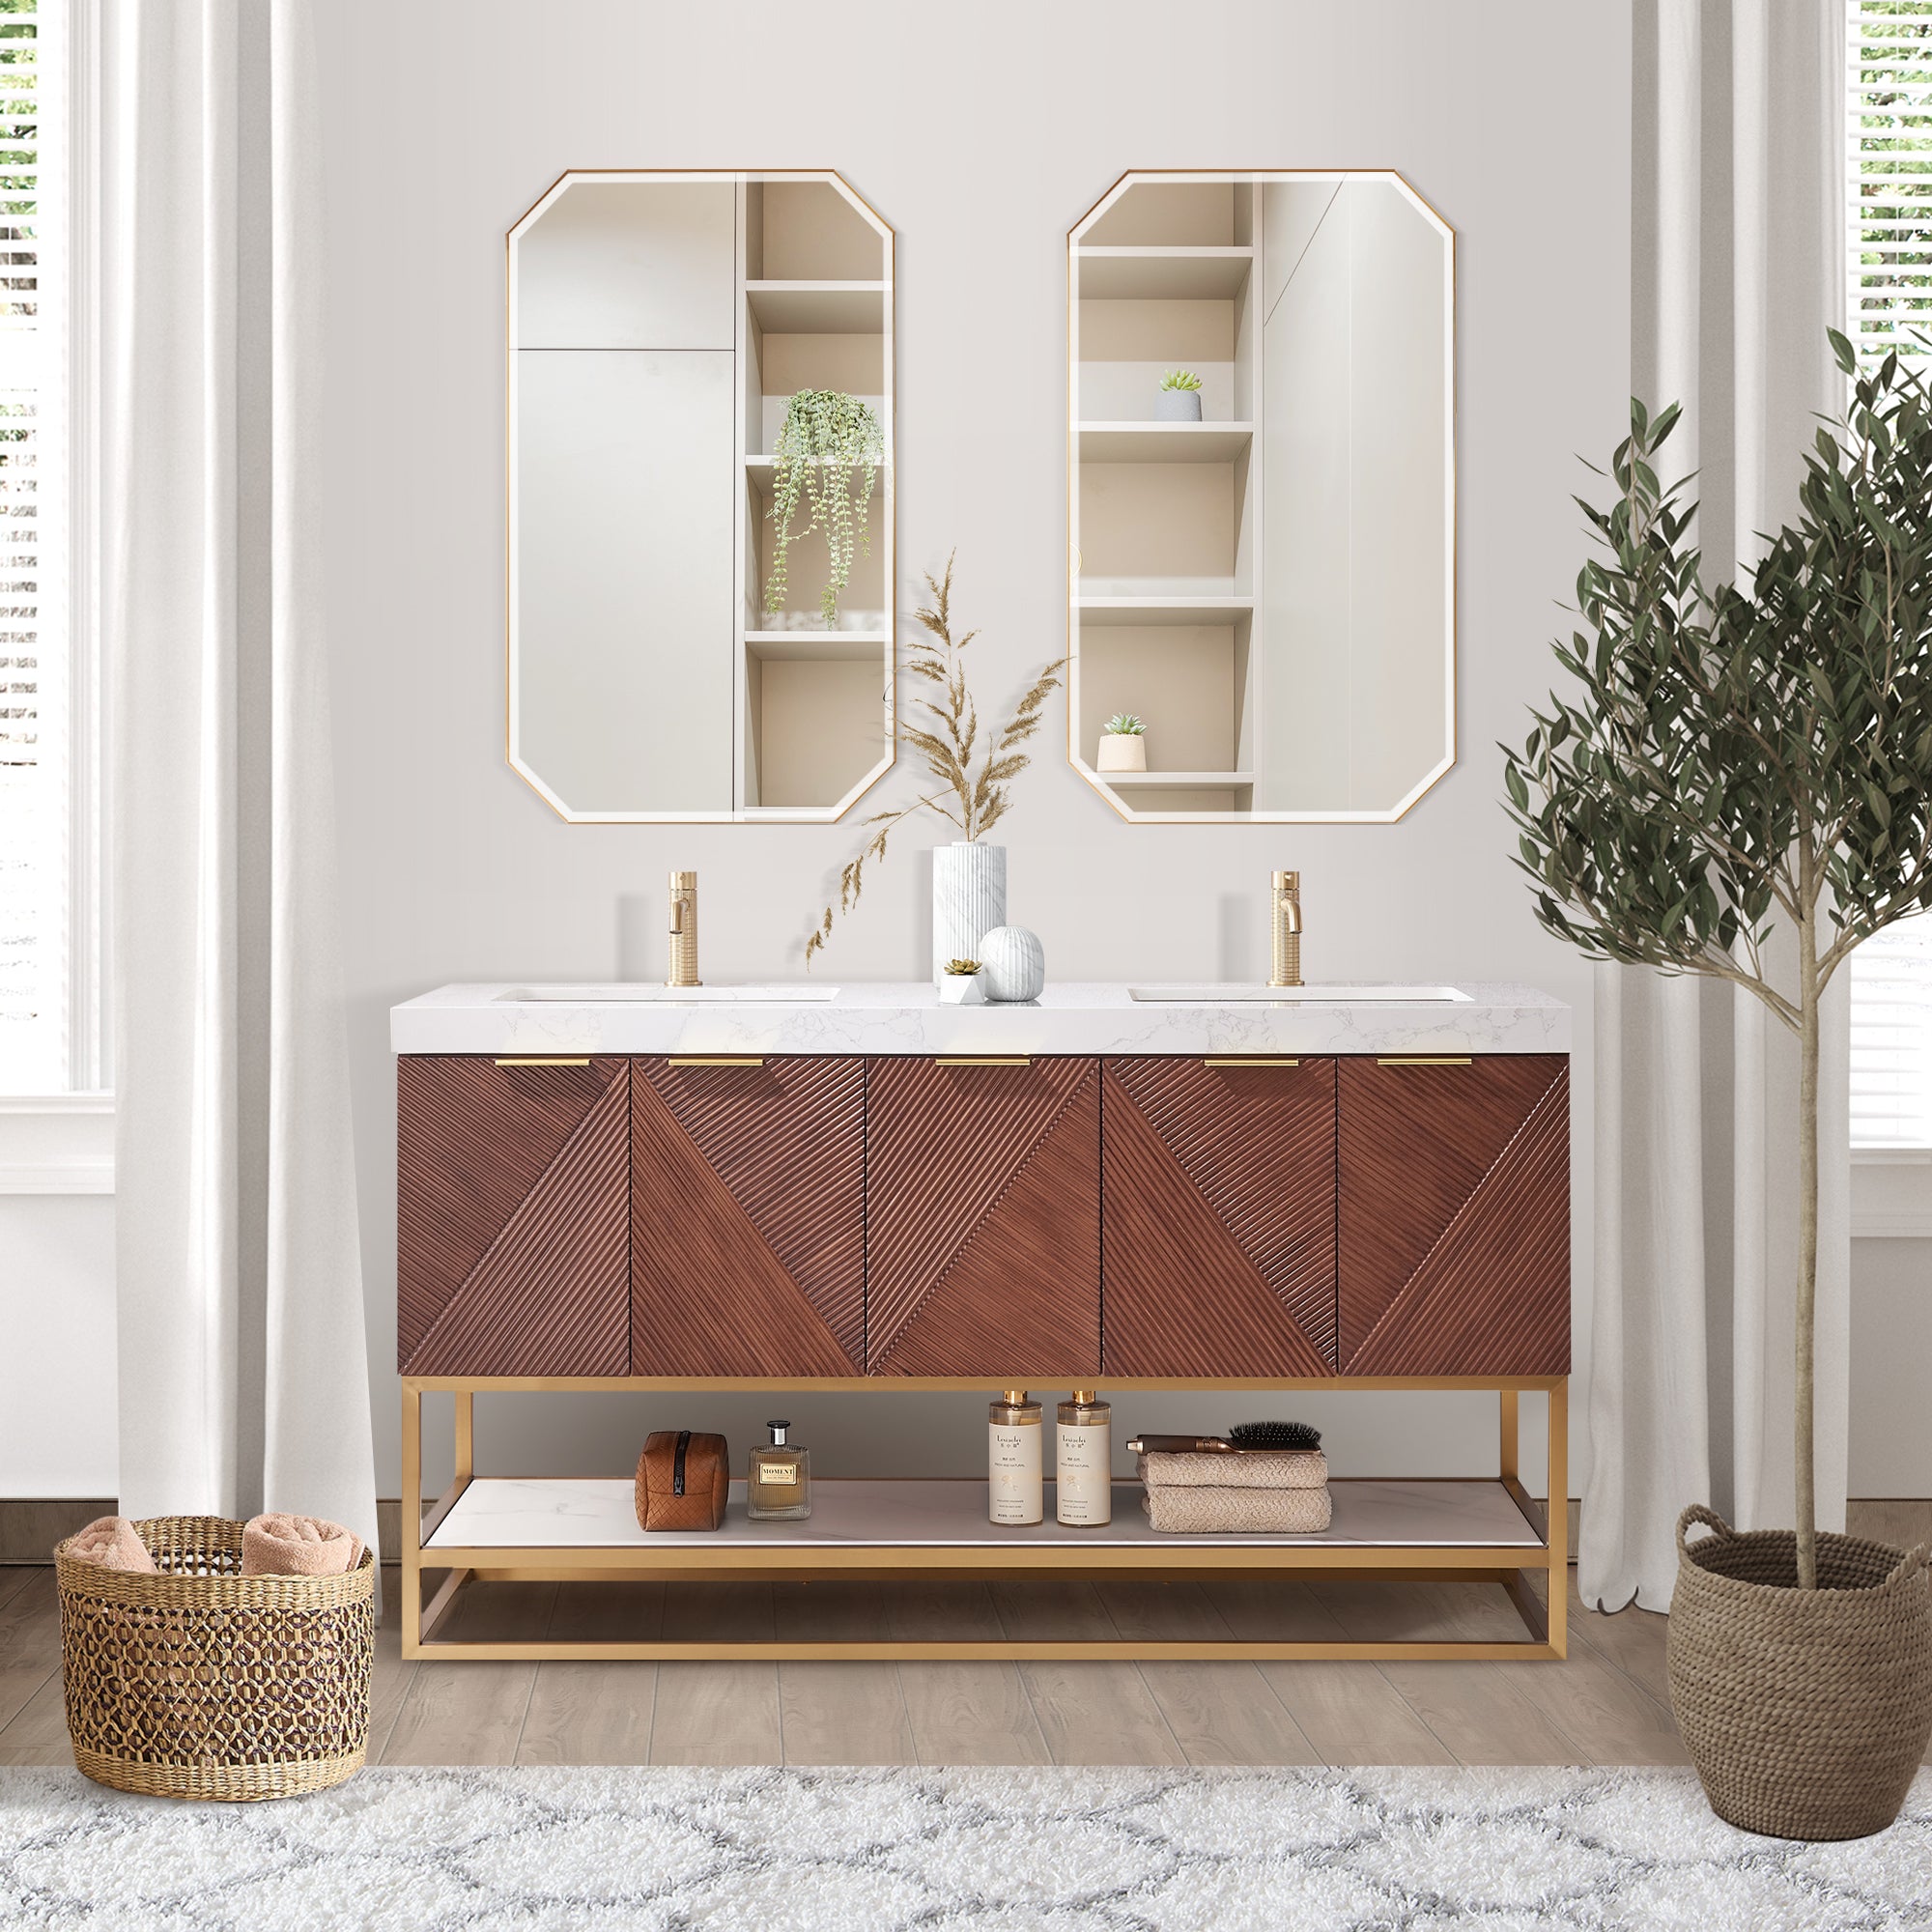 Mahon 60MG" Free-standing Double Bath Vanity in North American Deep Walnut with White Grain Composite Stone Top